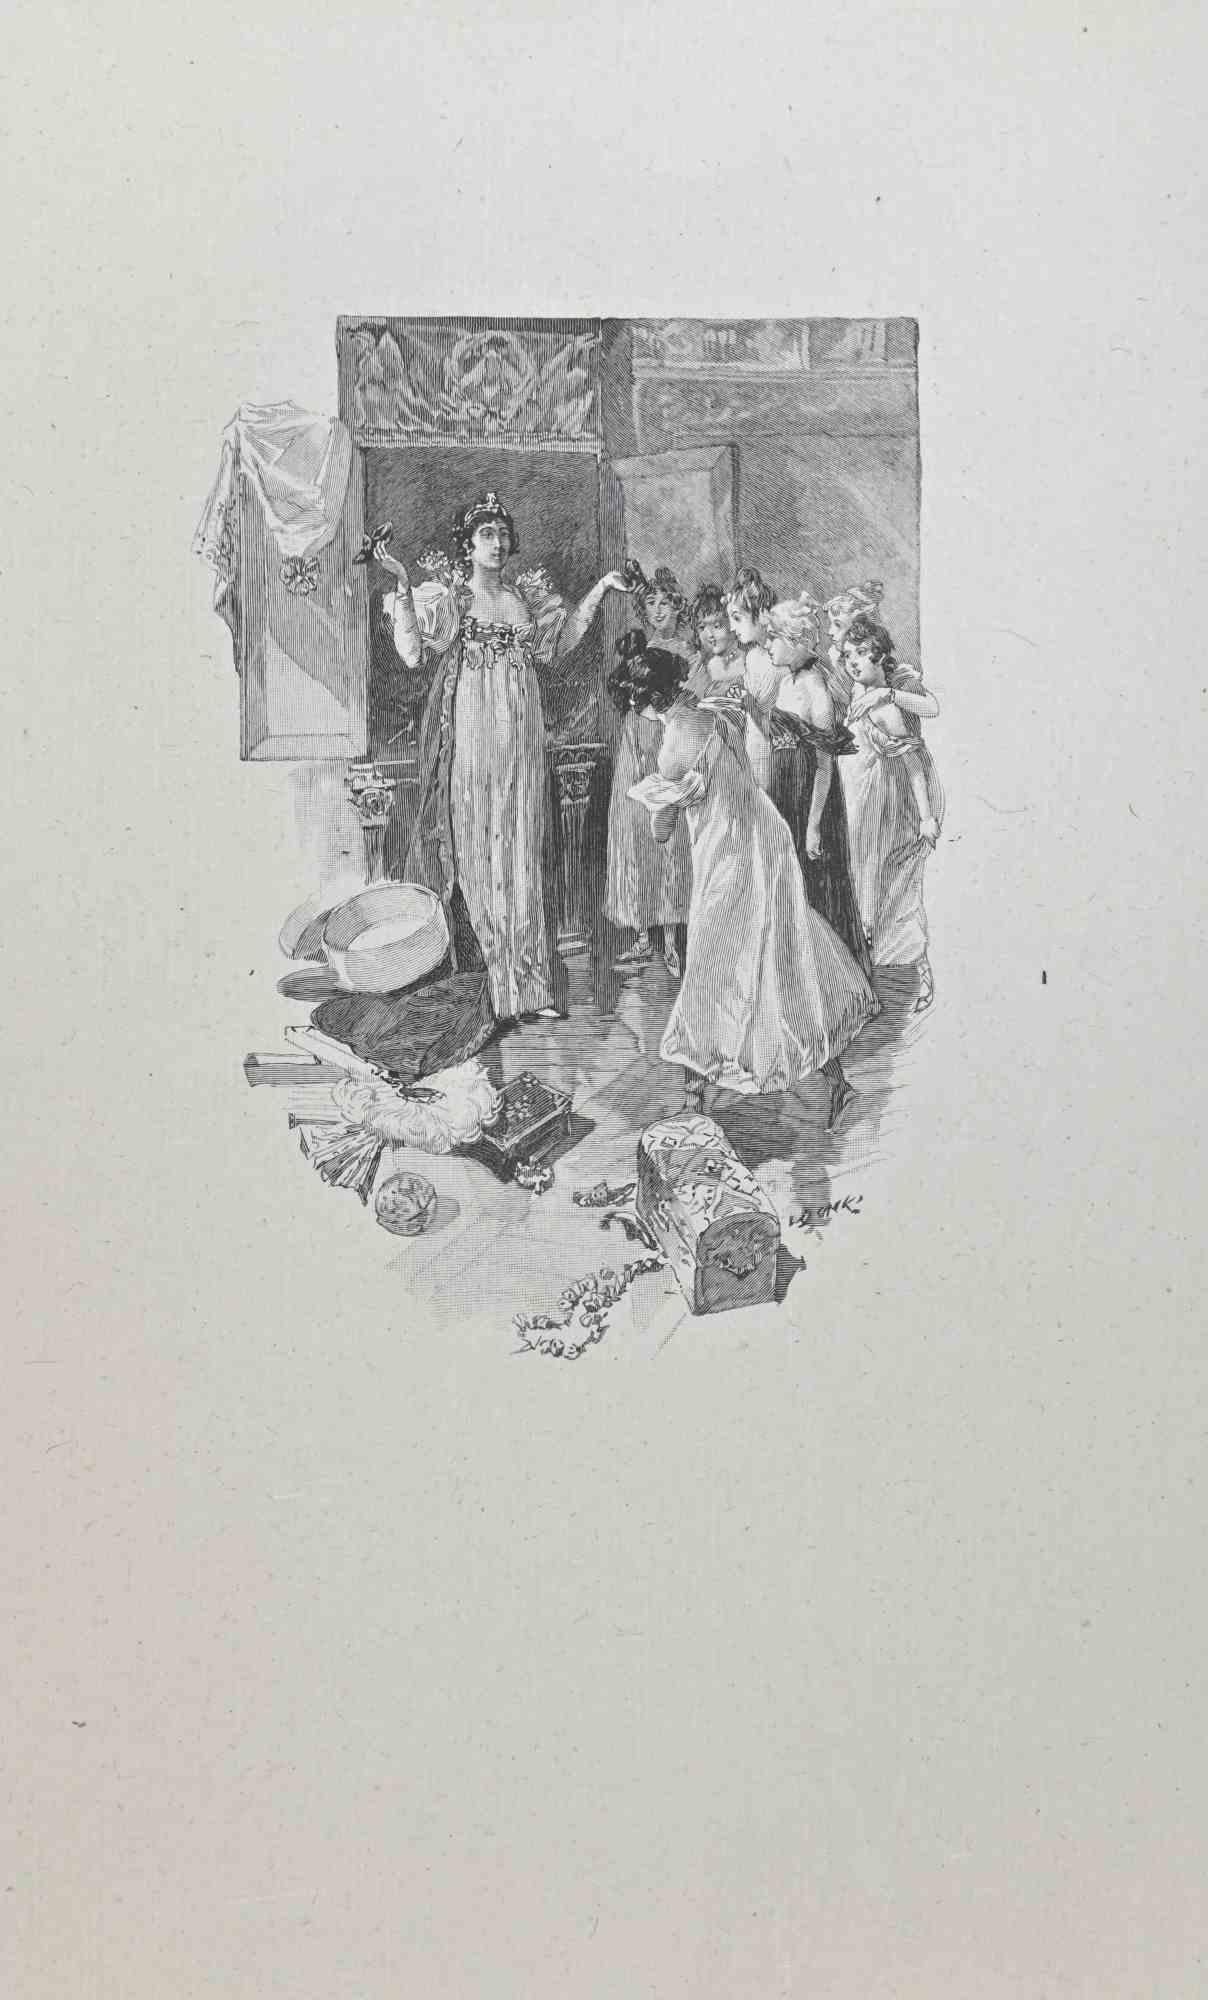 The Gifts - Lithograph by Hégésippe Moreau - 1838